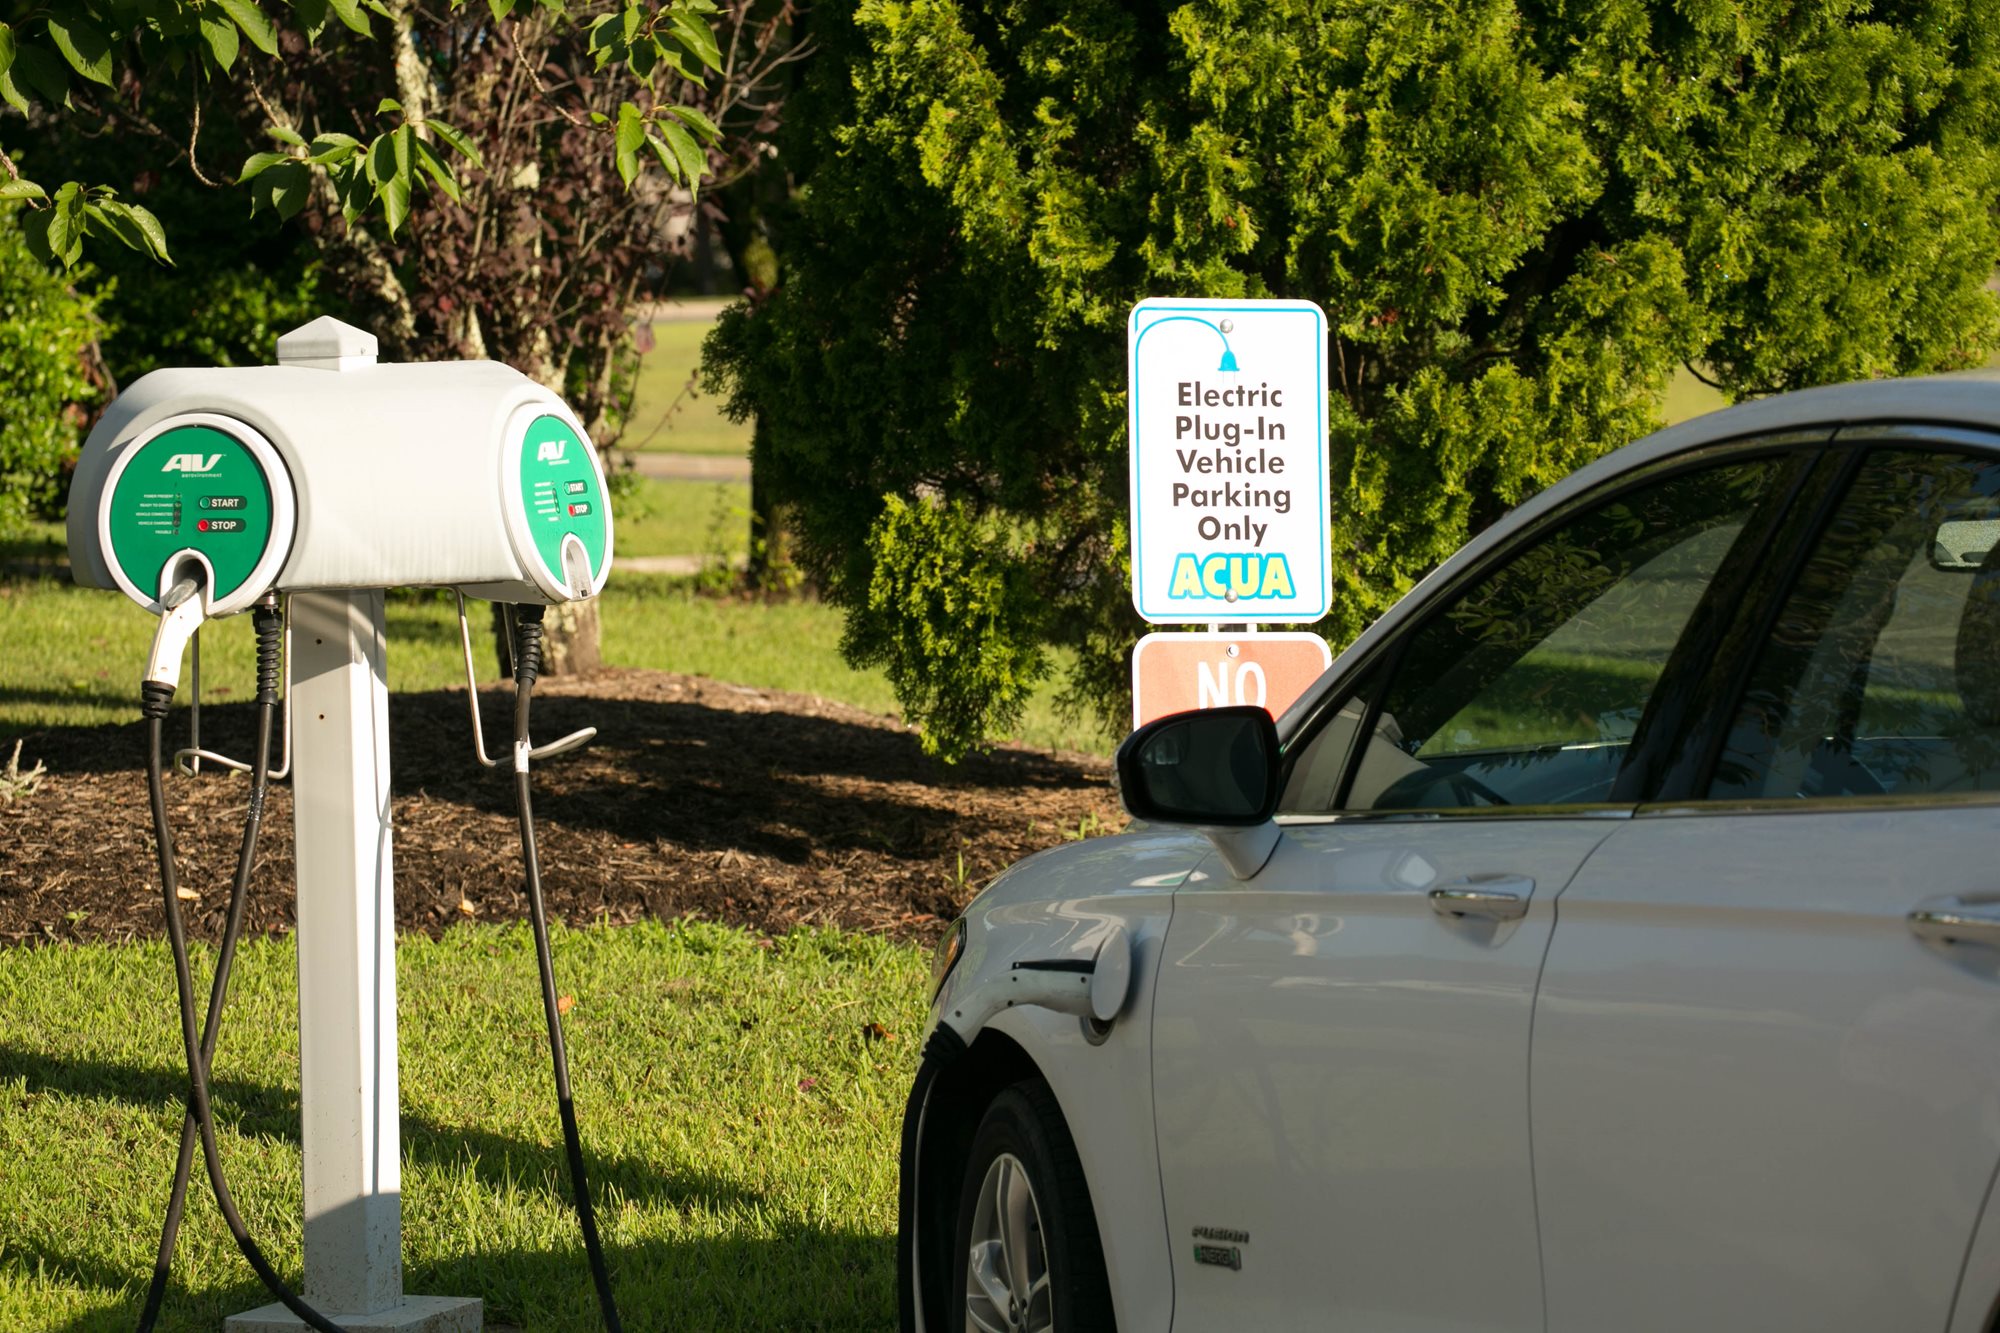 ACUA Awarded State Funding to Install Fast Electric Vehicle Charging Stations in Atlantic City 